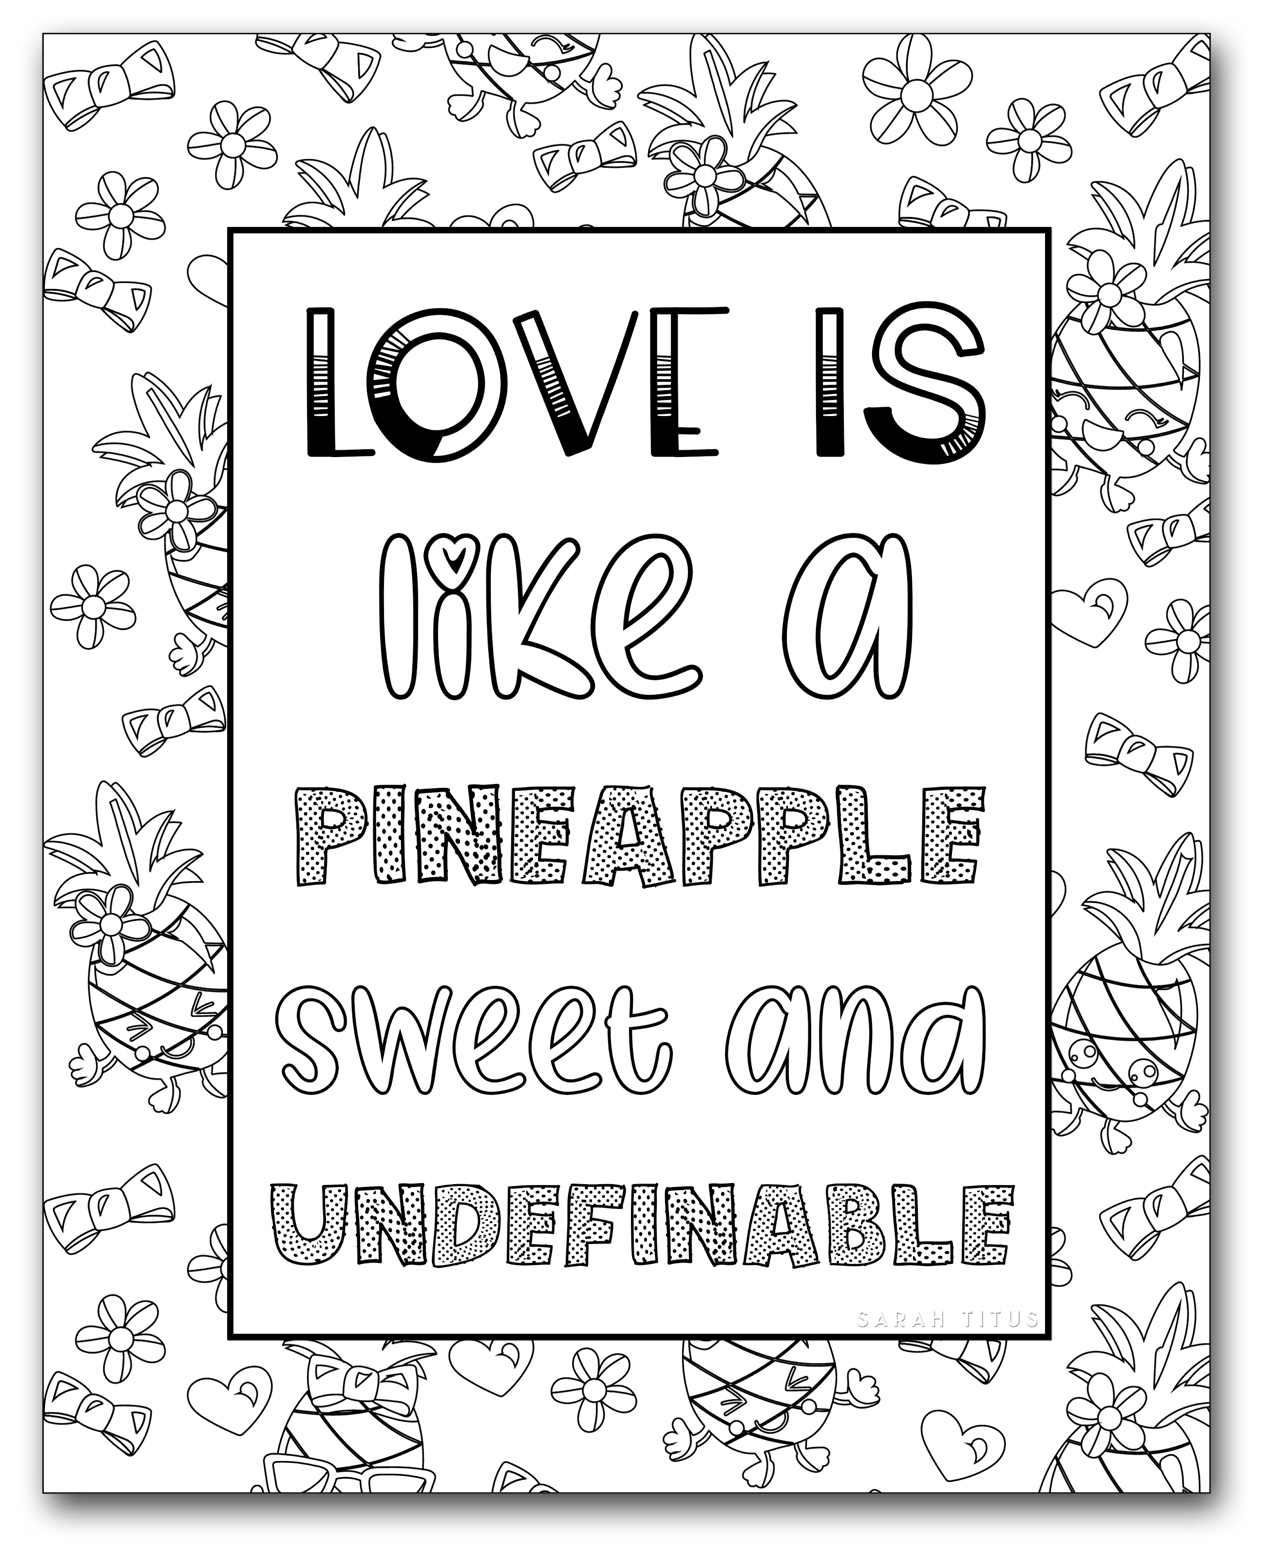 https://www.sarahtitus.com/wp-content/uploads/2018/08/Printable-Coloring-Pages-for-Girls-1.jpg